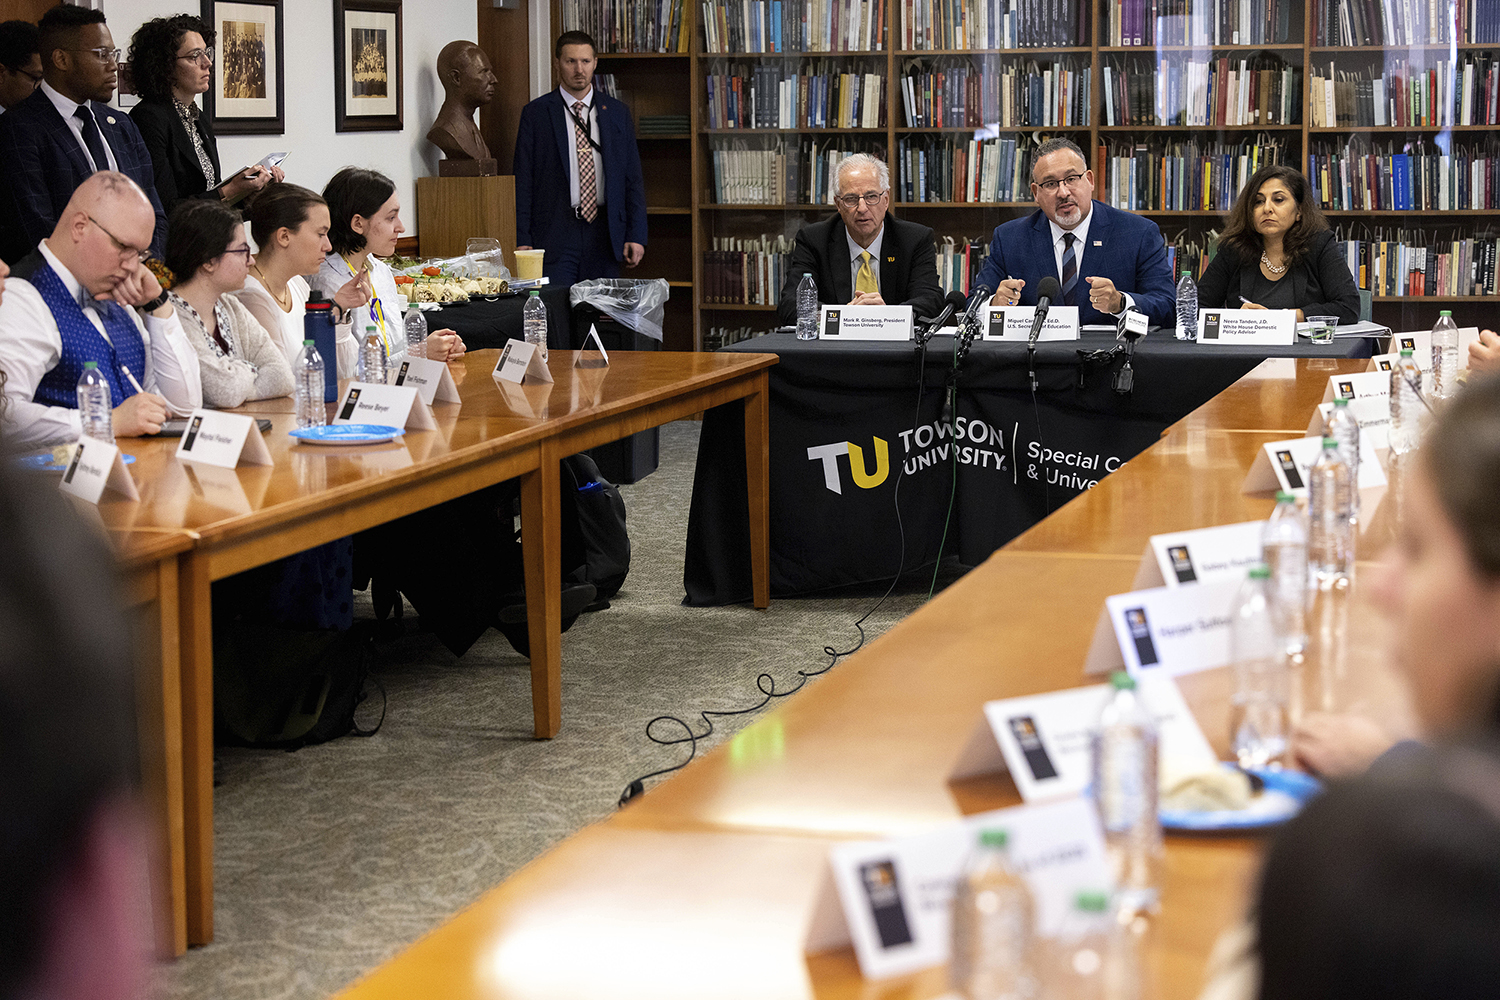 Education Secretary Miguel Cardona, domestic policy adviser Neera Tanden and Towson University president Mark Ginsberg meet with students during a visit to Towson University to discuss antisemitism on college campuses, Thursday, Nov. 2, 2023, in Towson, Md. (AP Photo/Julia Nikhinson)